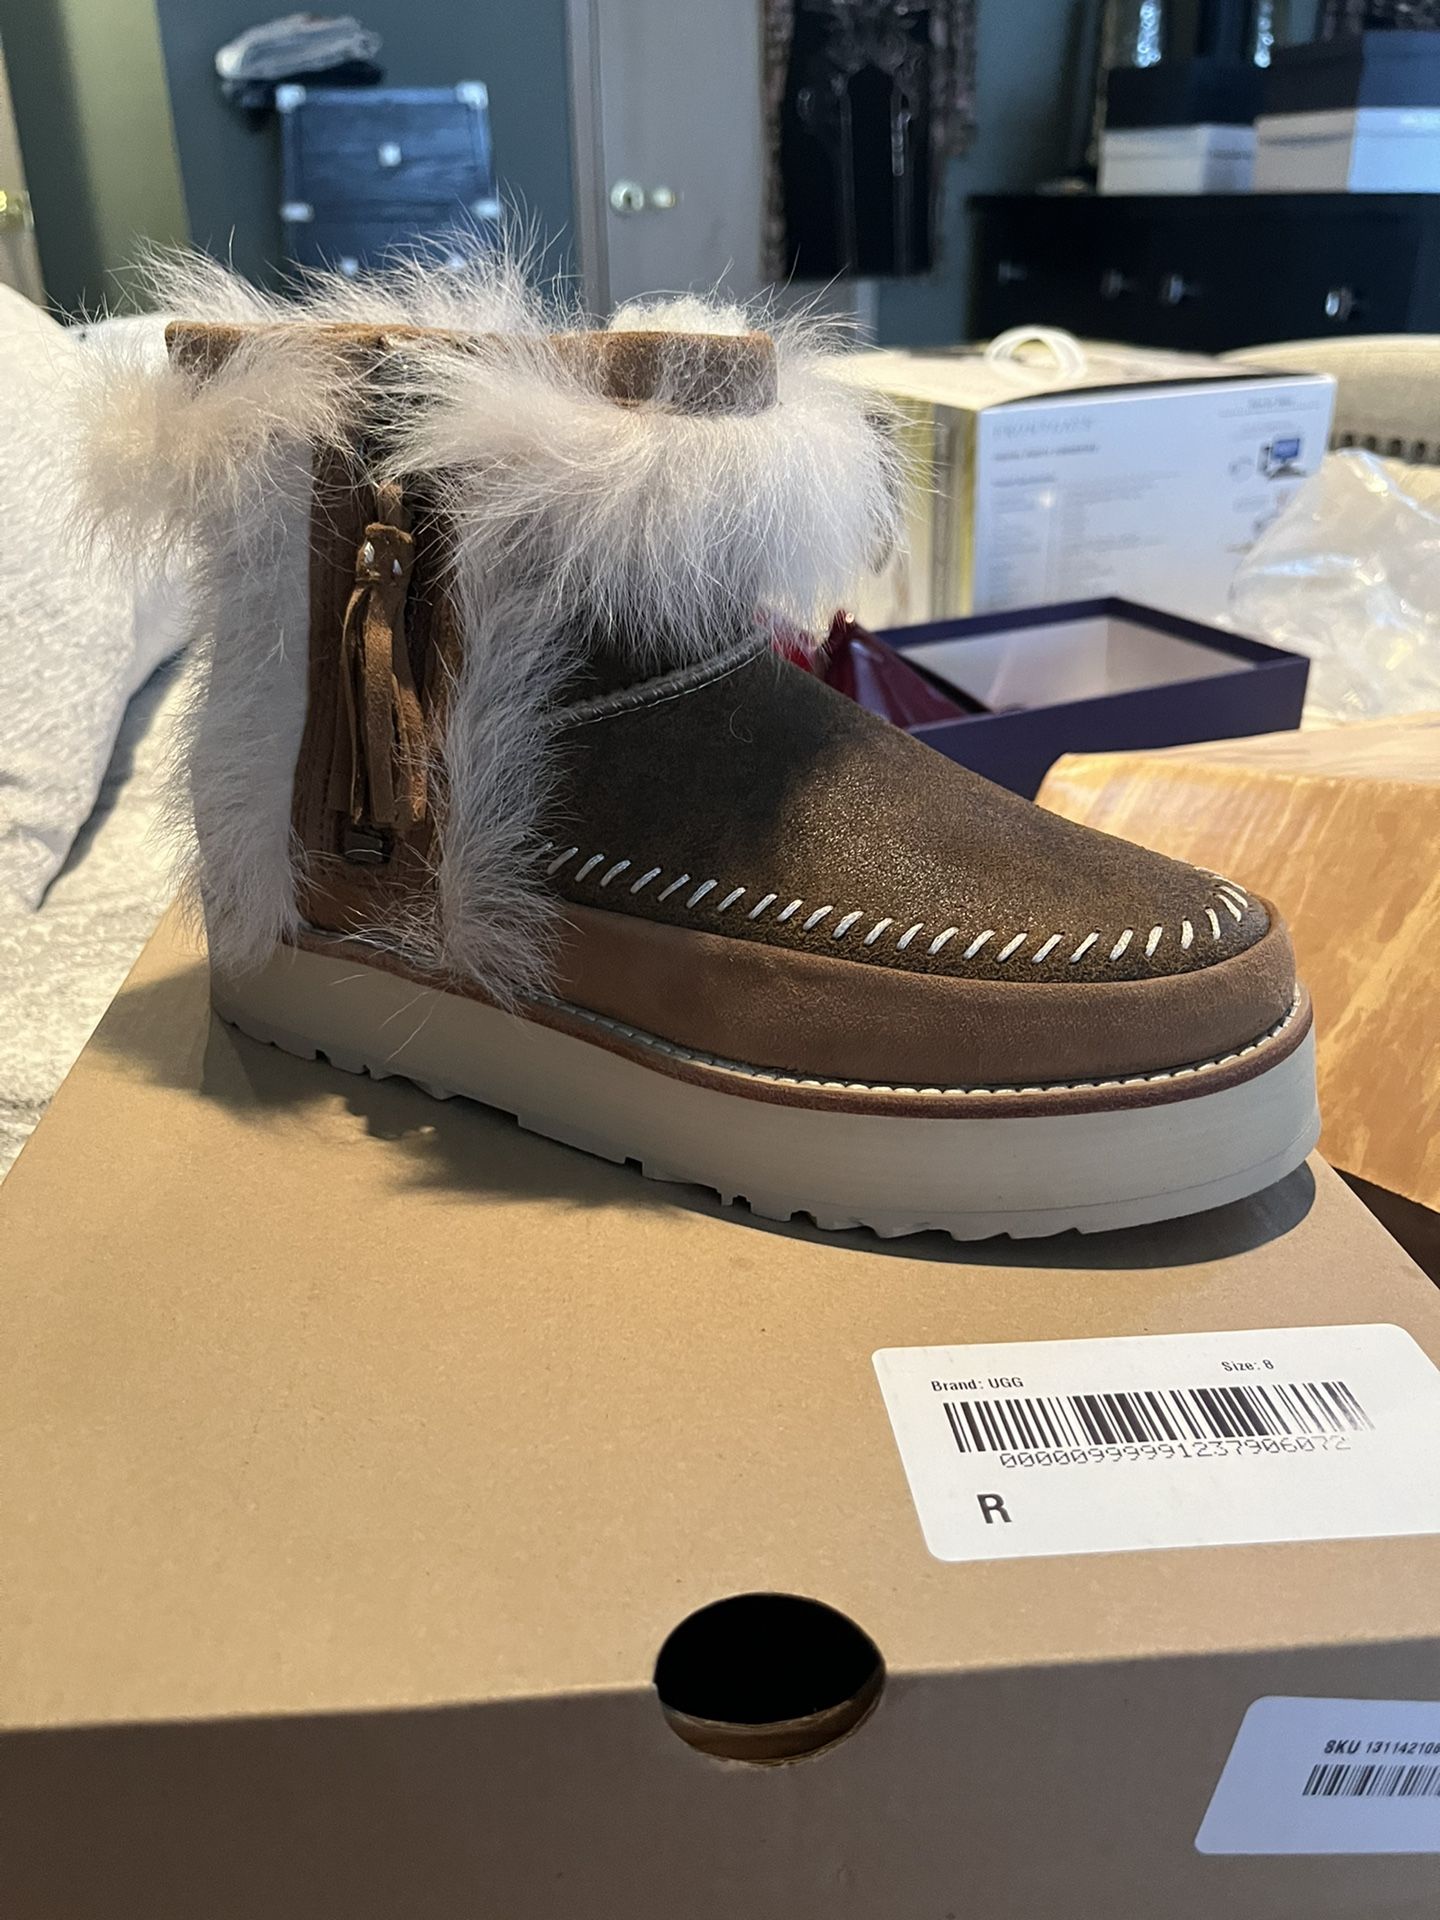 Ugg fur boots size 8